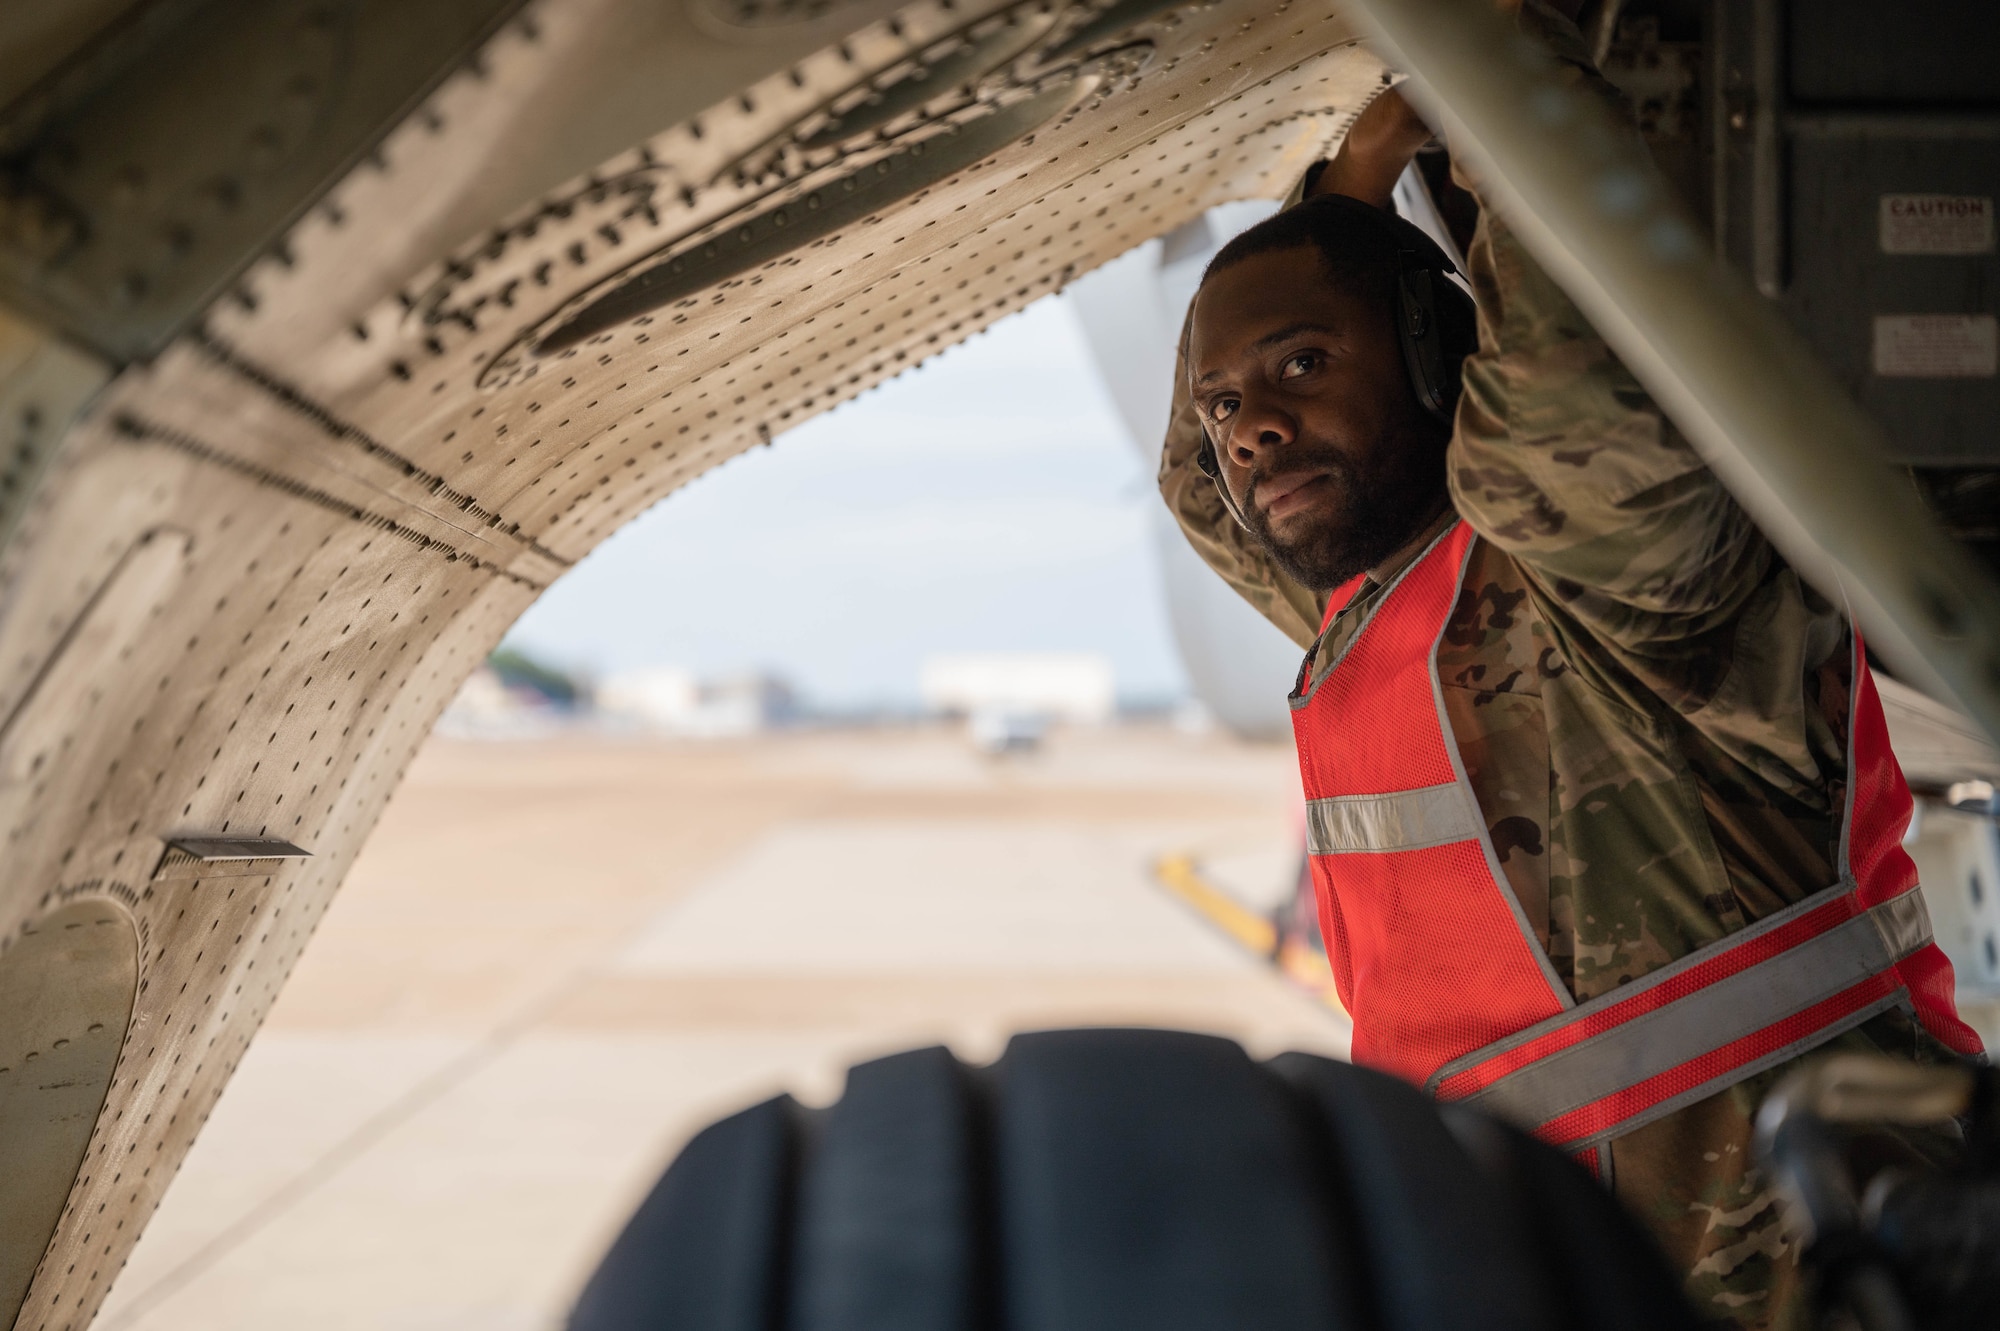 Senior Airman Joe Dorsey, 2nd Aircraft Maintenance Squadron crew chief, waits for confirmation while completing a pre-flight check on a B-52 Stratofortress during Global Thunder 22 at  Barksdale Air Force Base, Louisiana, Nov. 2, 2021.